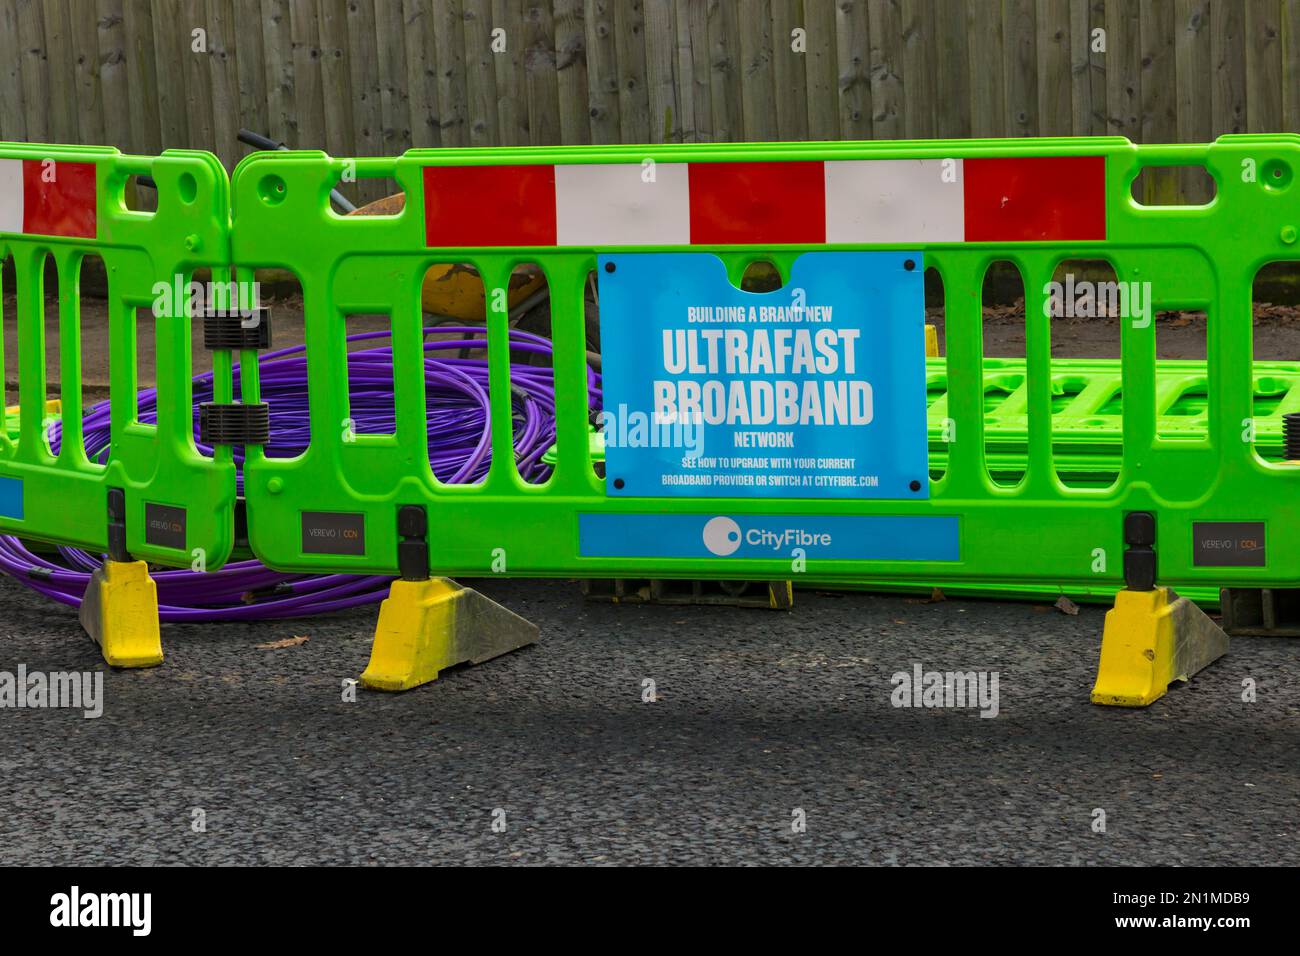 Work being undertaken by City Fibre to install a brand new ultrafast broadband network in the area at Poole, Dorset UK in February Stock Photo